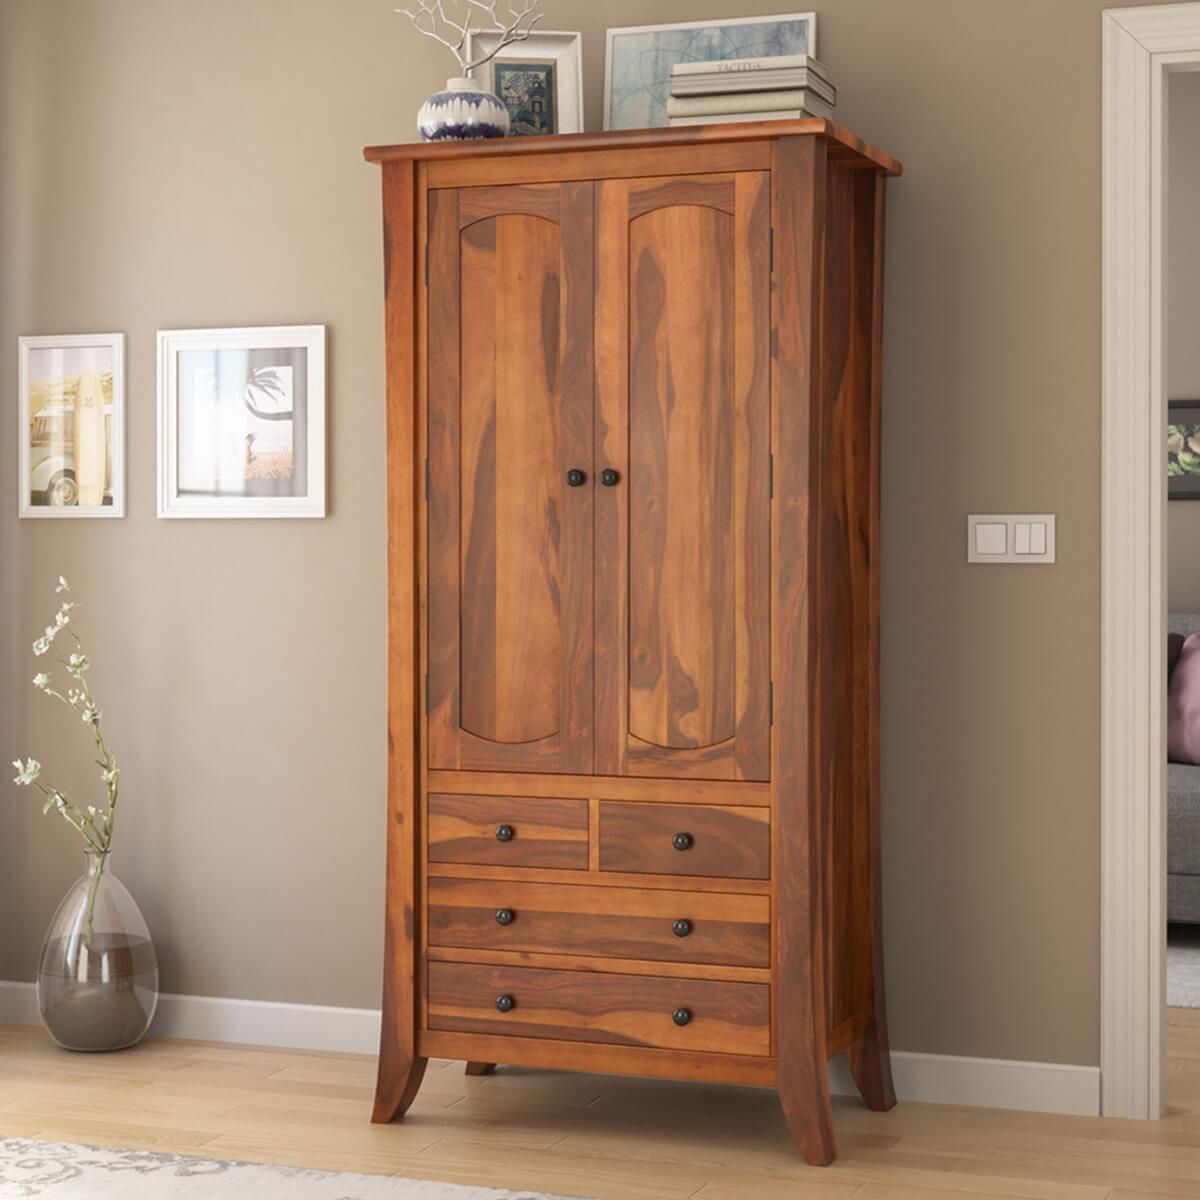 Georgia Rustic Solid Wood Wardrobe Armoire Closet With 4 Drawers In Cheap Solid Wood Wardrobes (View 3 of 11)